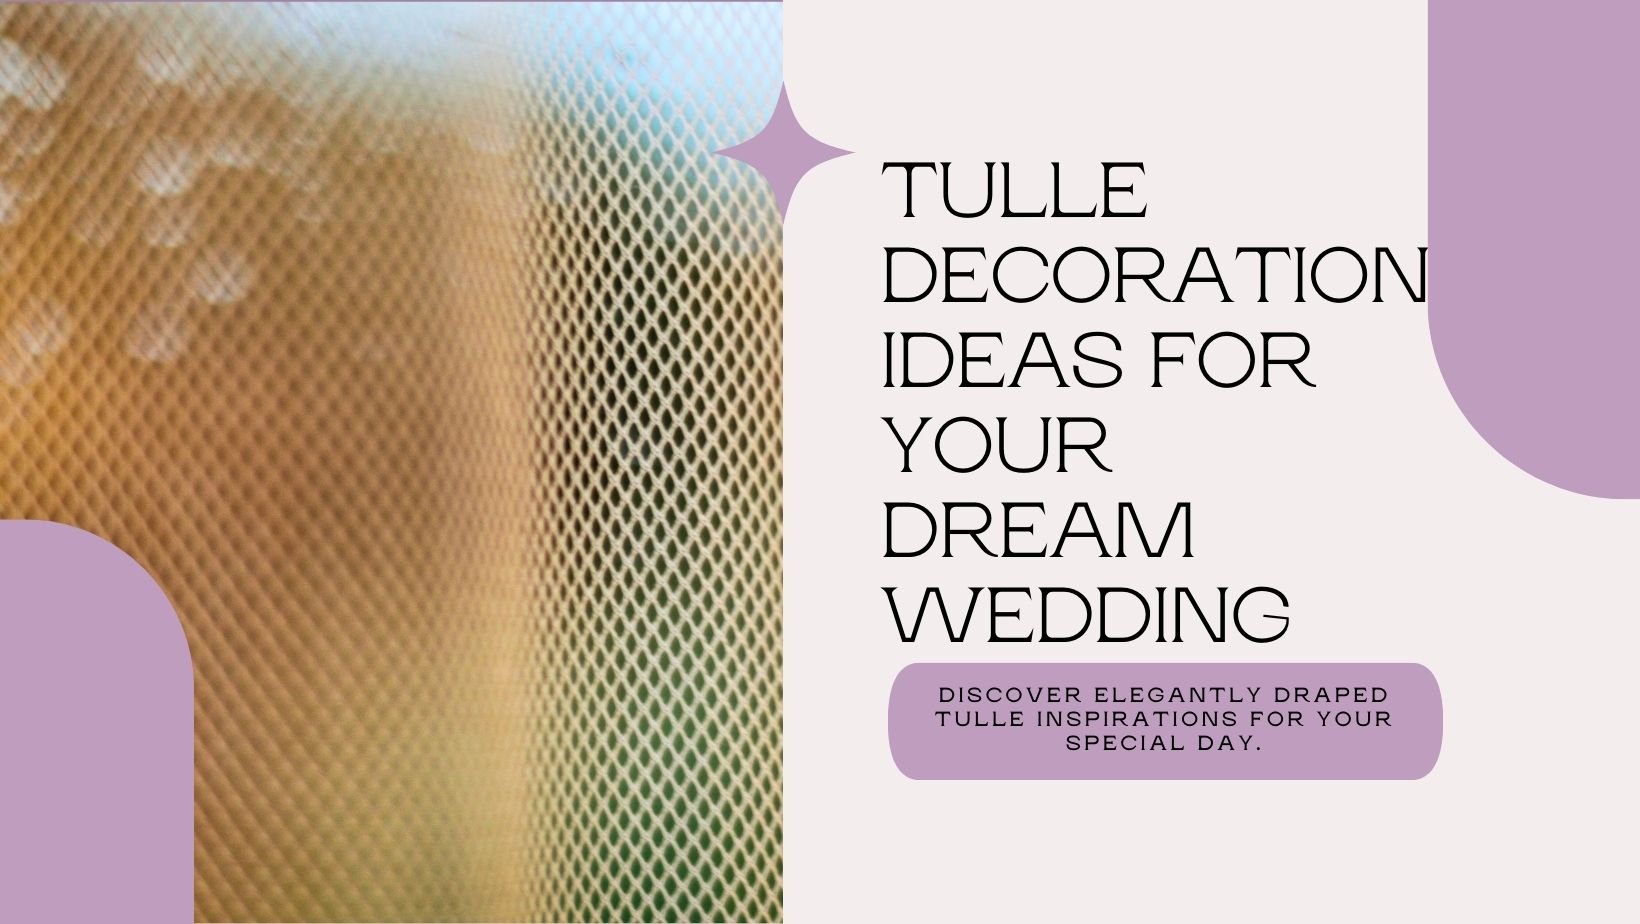 Top 5 Wedding Tulle Decoration Ideas: Elegance on a Budget